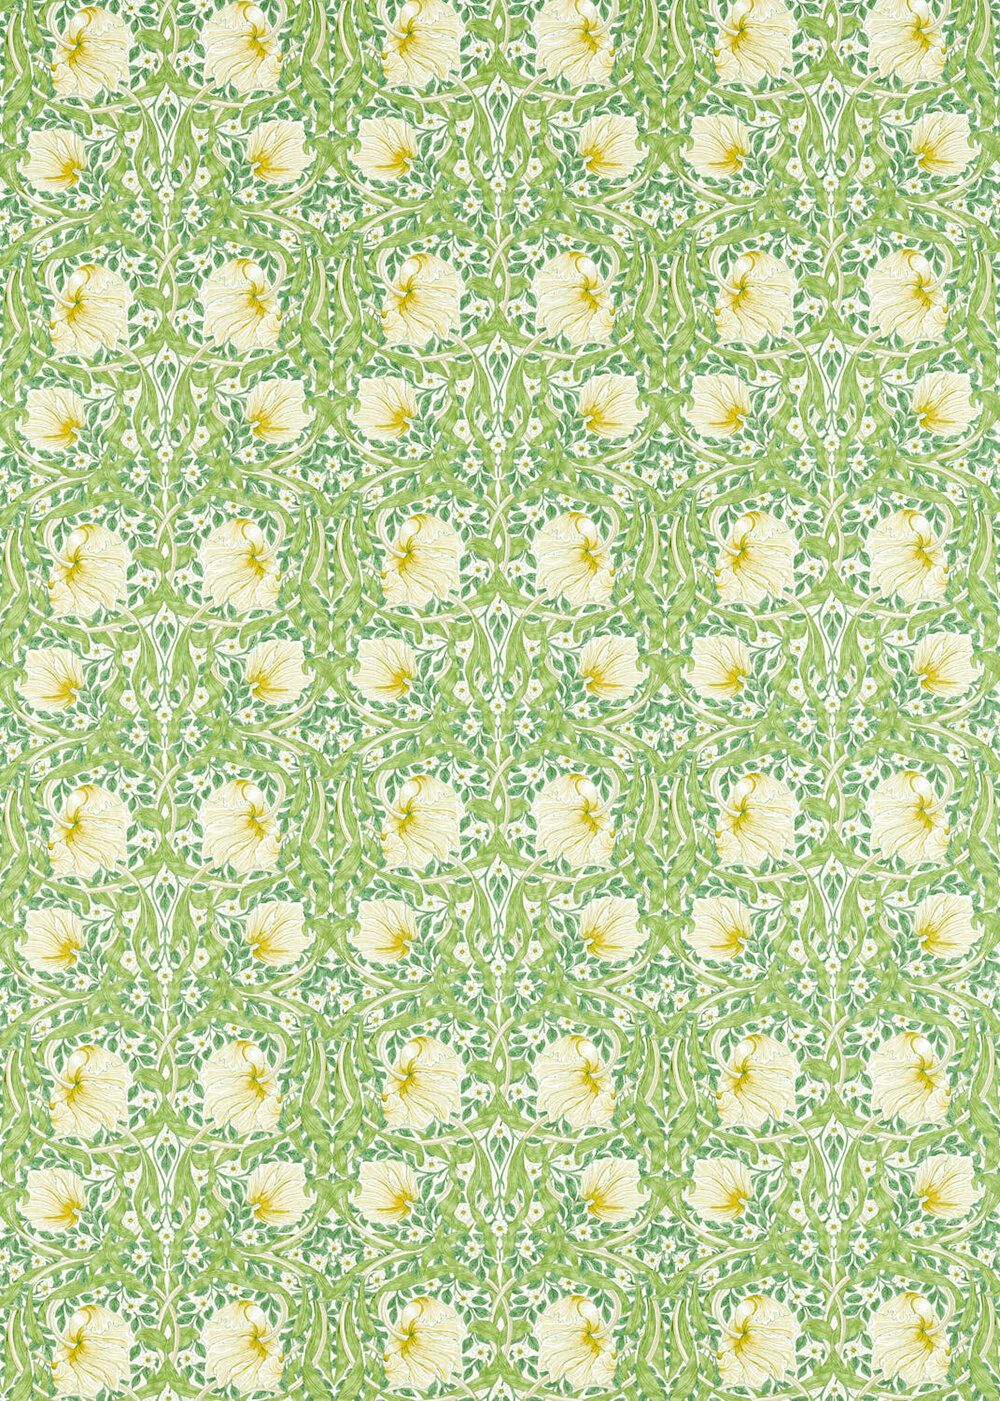 Pimpernel Fabric - Weld/ Leaf Green - by Morris